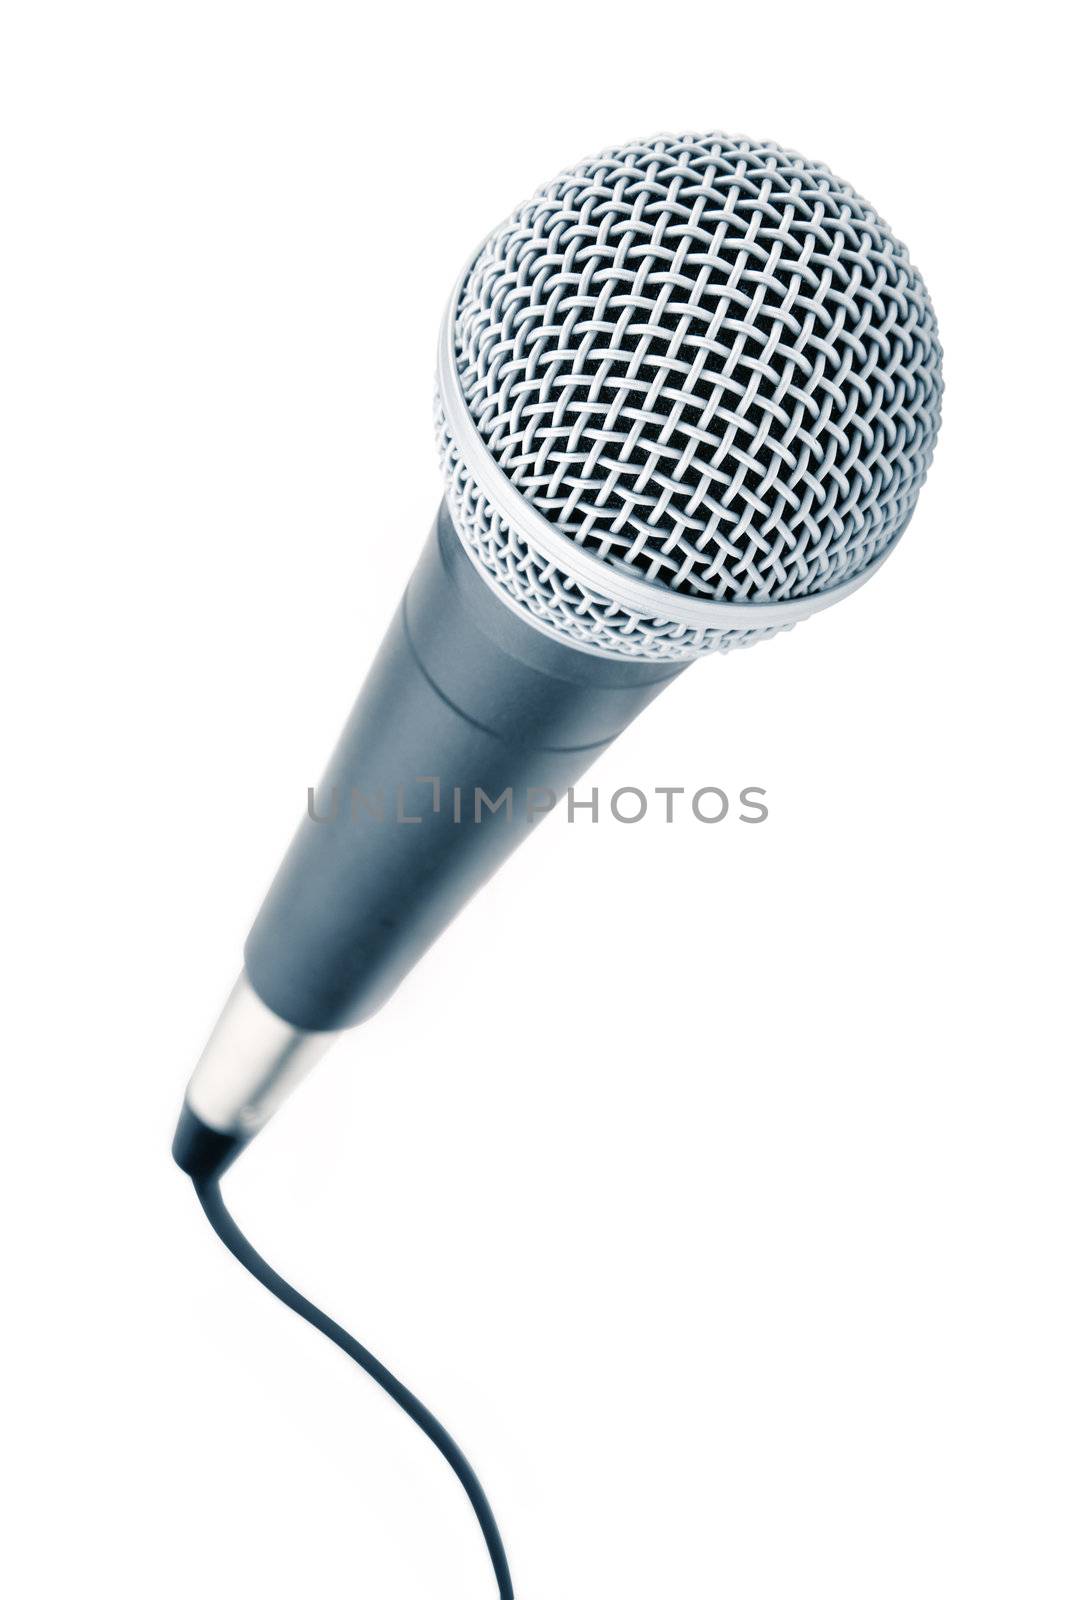 Professional microphone with a cable connected